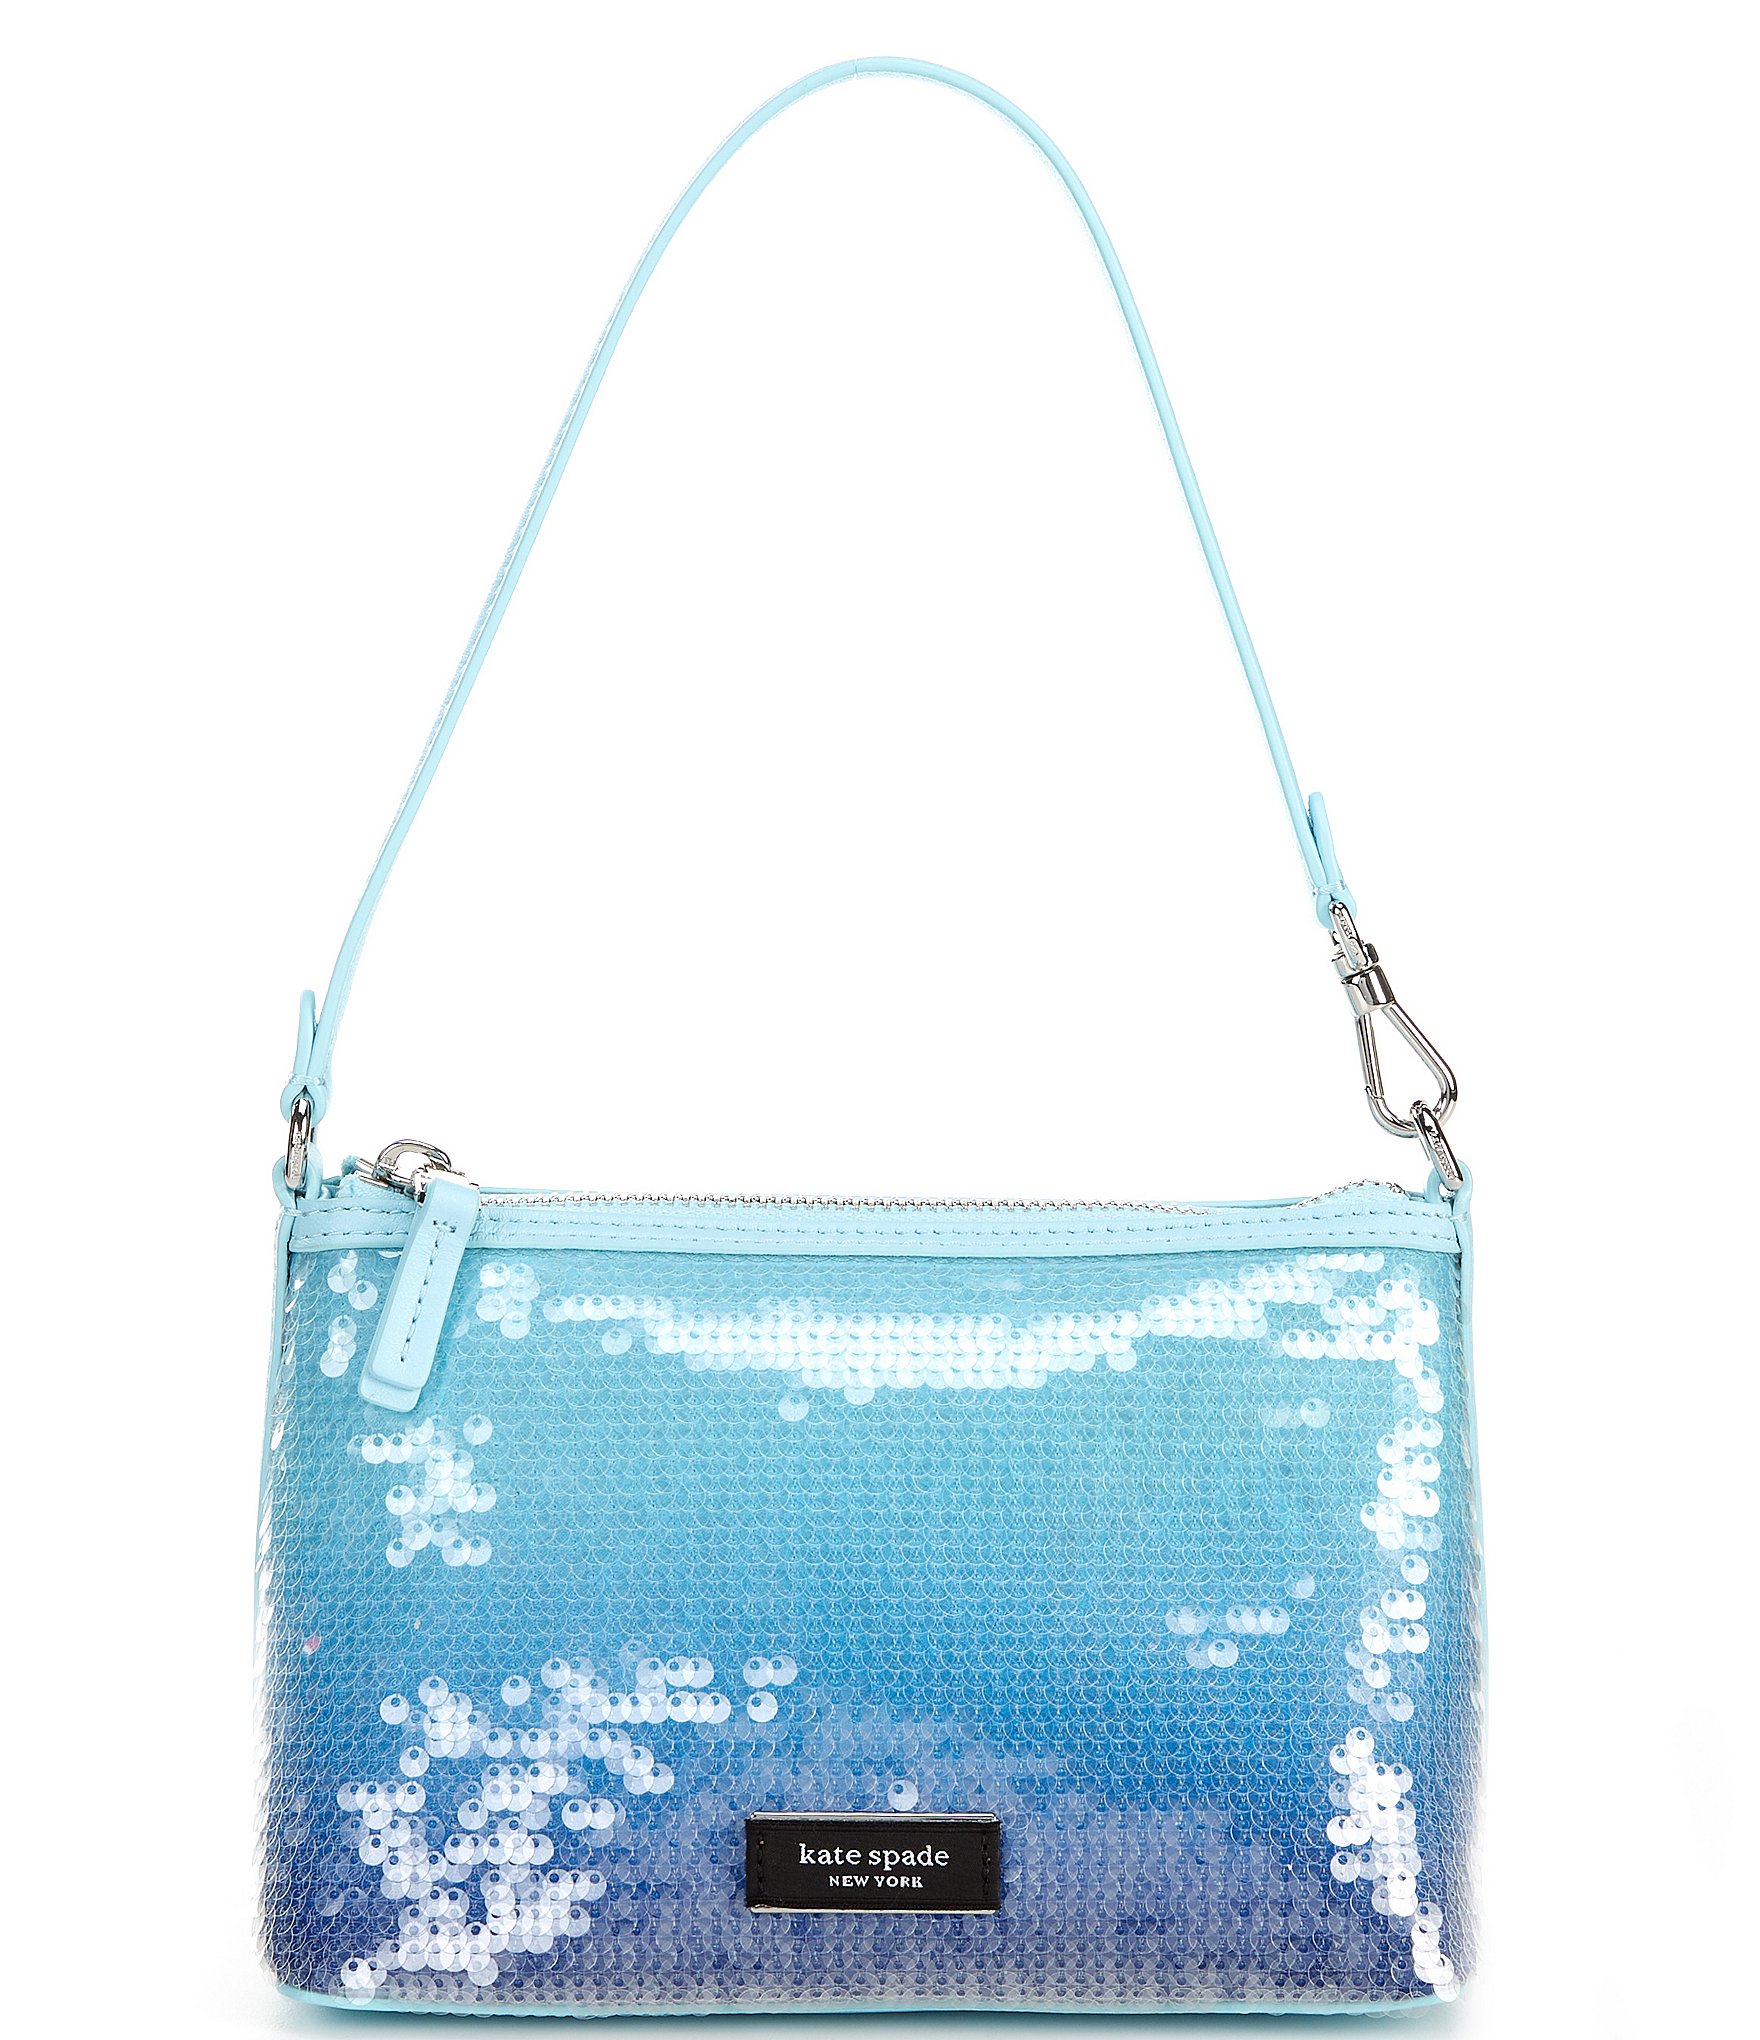 kate spade, Bags, Blue Hazy Floral Kate Spade Flap Crossbody Bag With  Chain